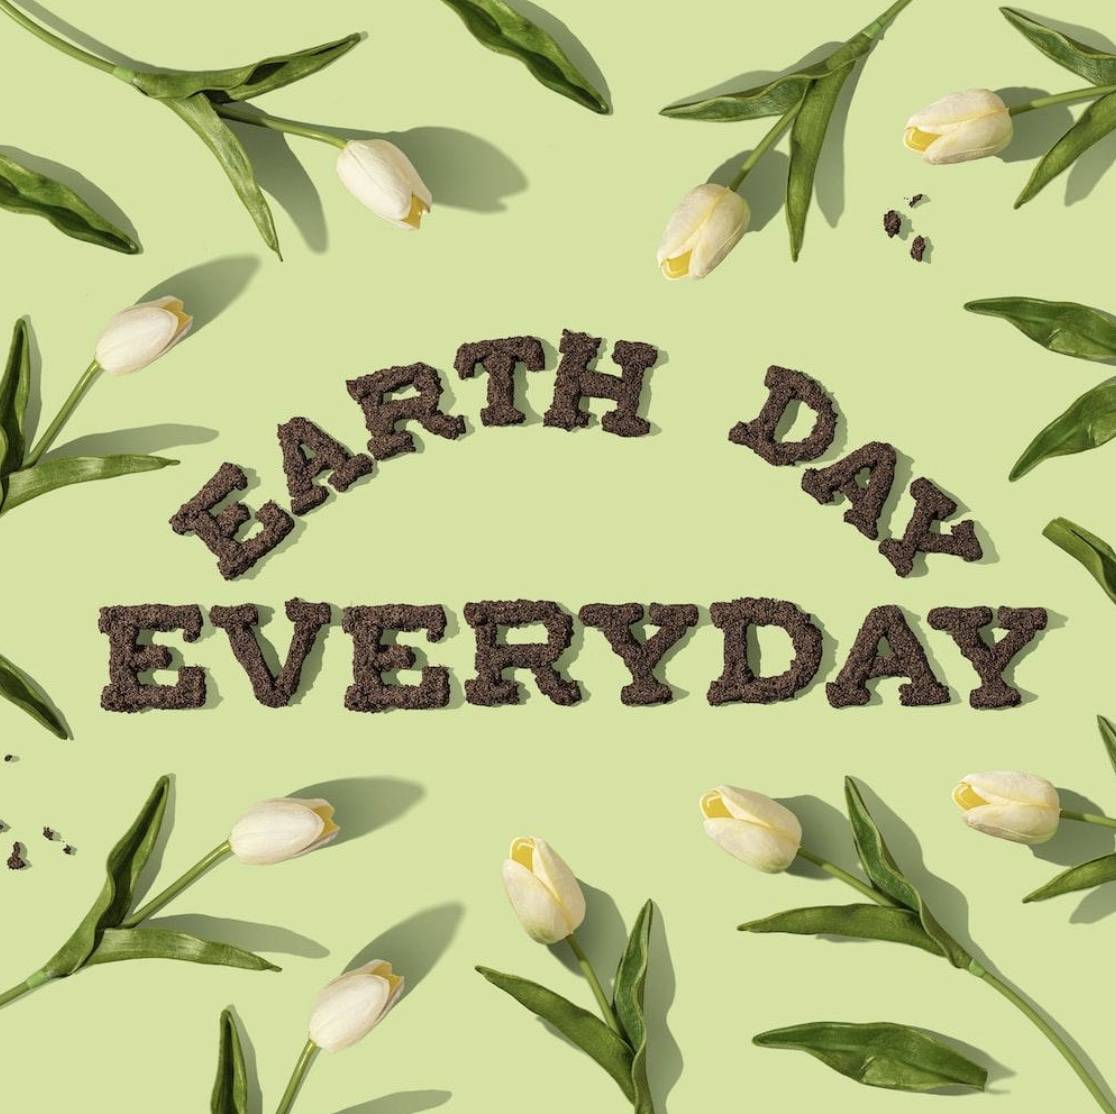 Earth every day